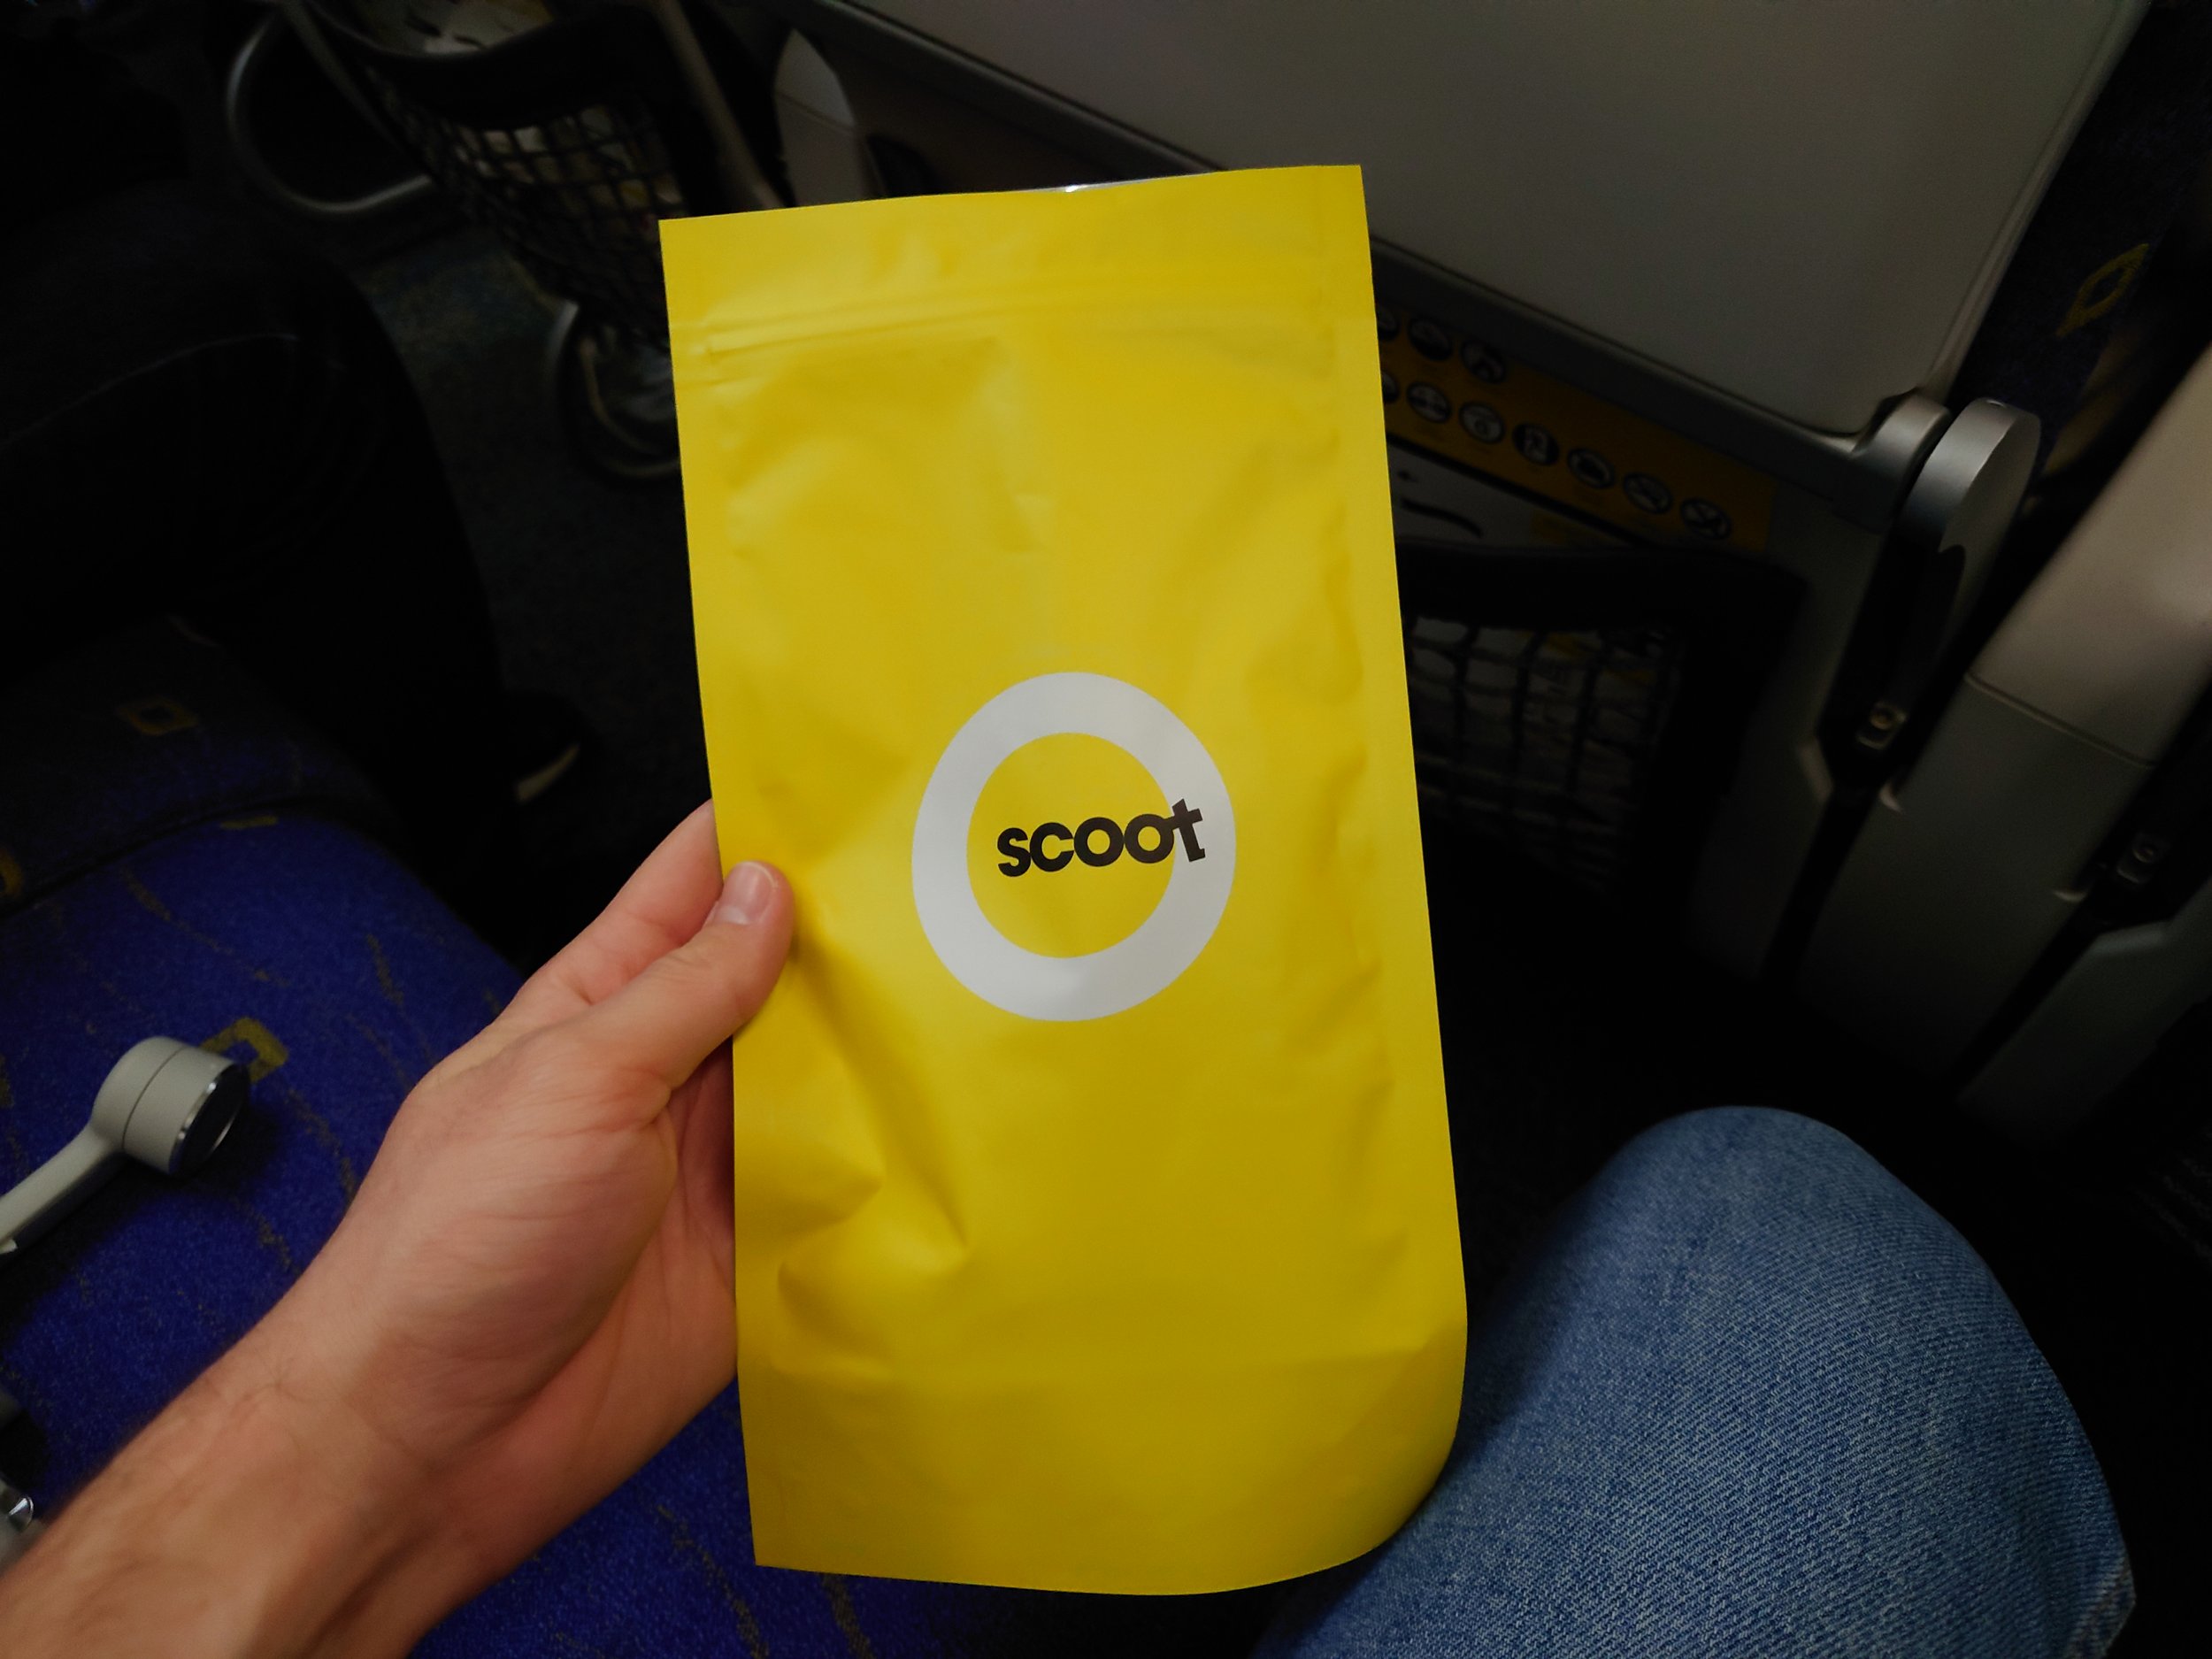 Scoot surprises on long-haul: a review of Scoot's 787 Economy Class ...